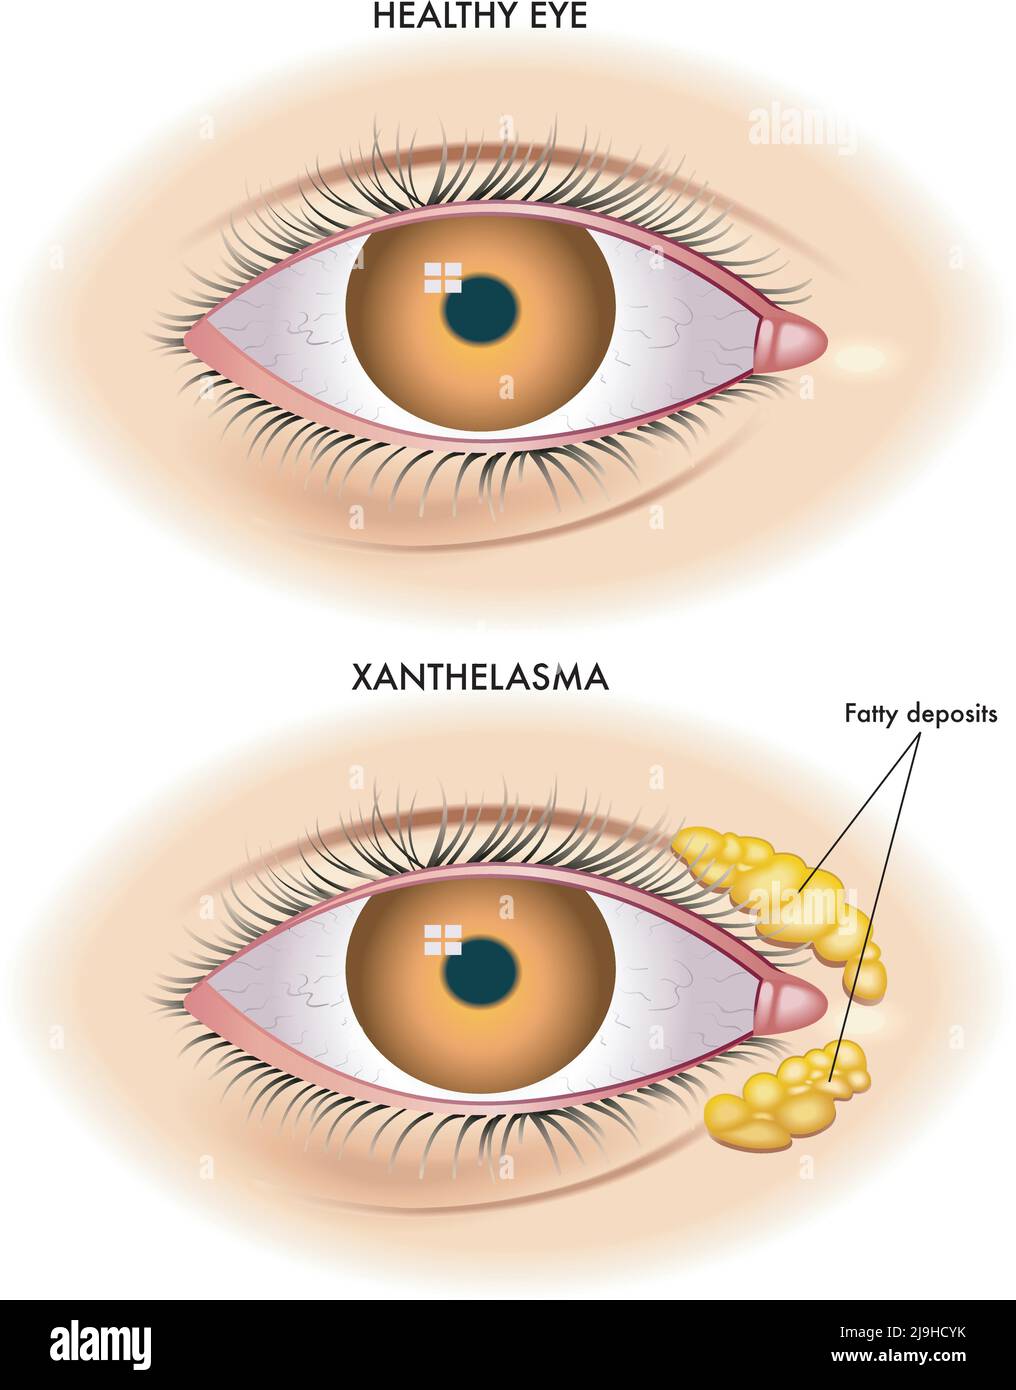 Medical illustration shows the comparison between a normal eye and one affected by xanthelasma. Stock Vector